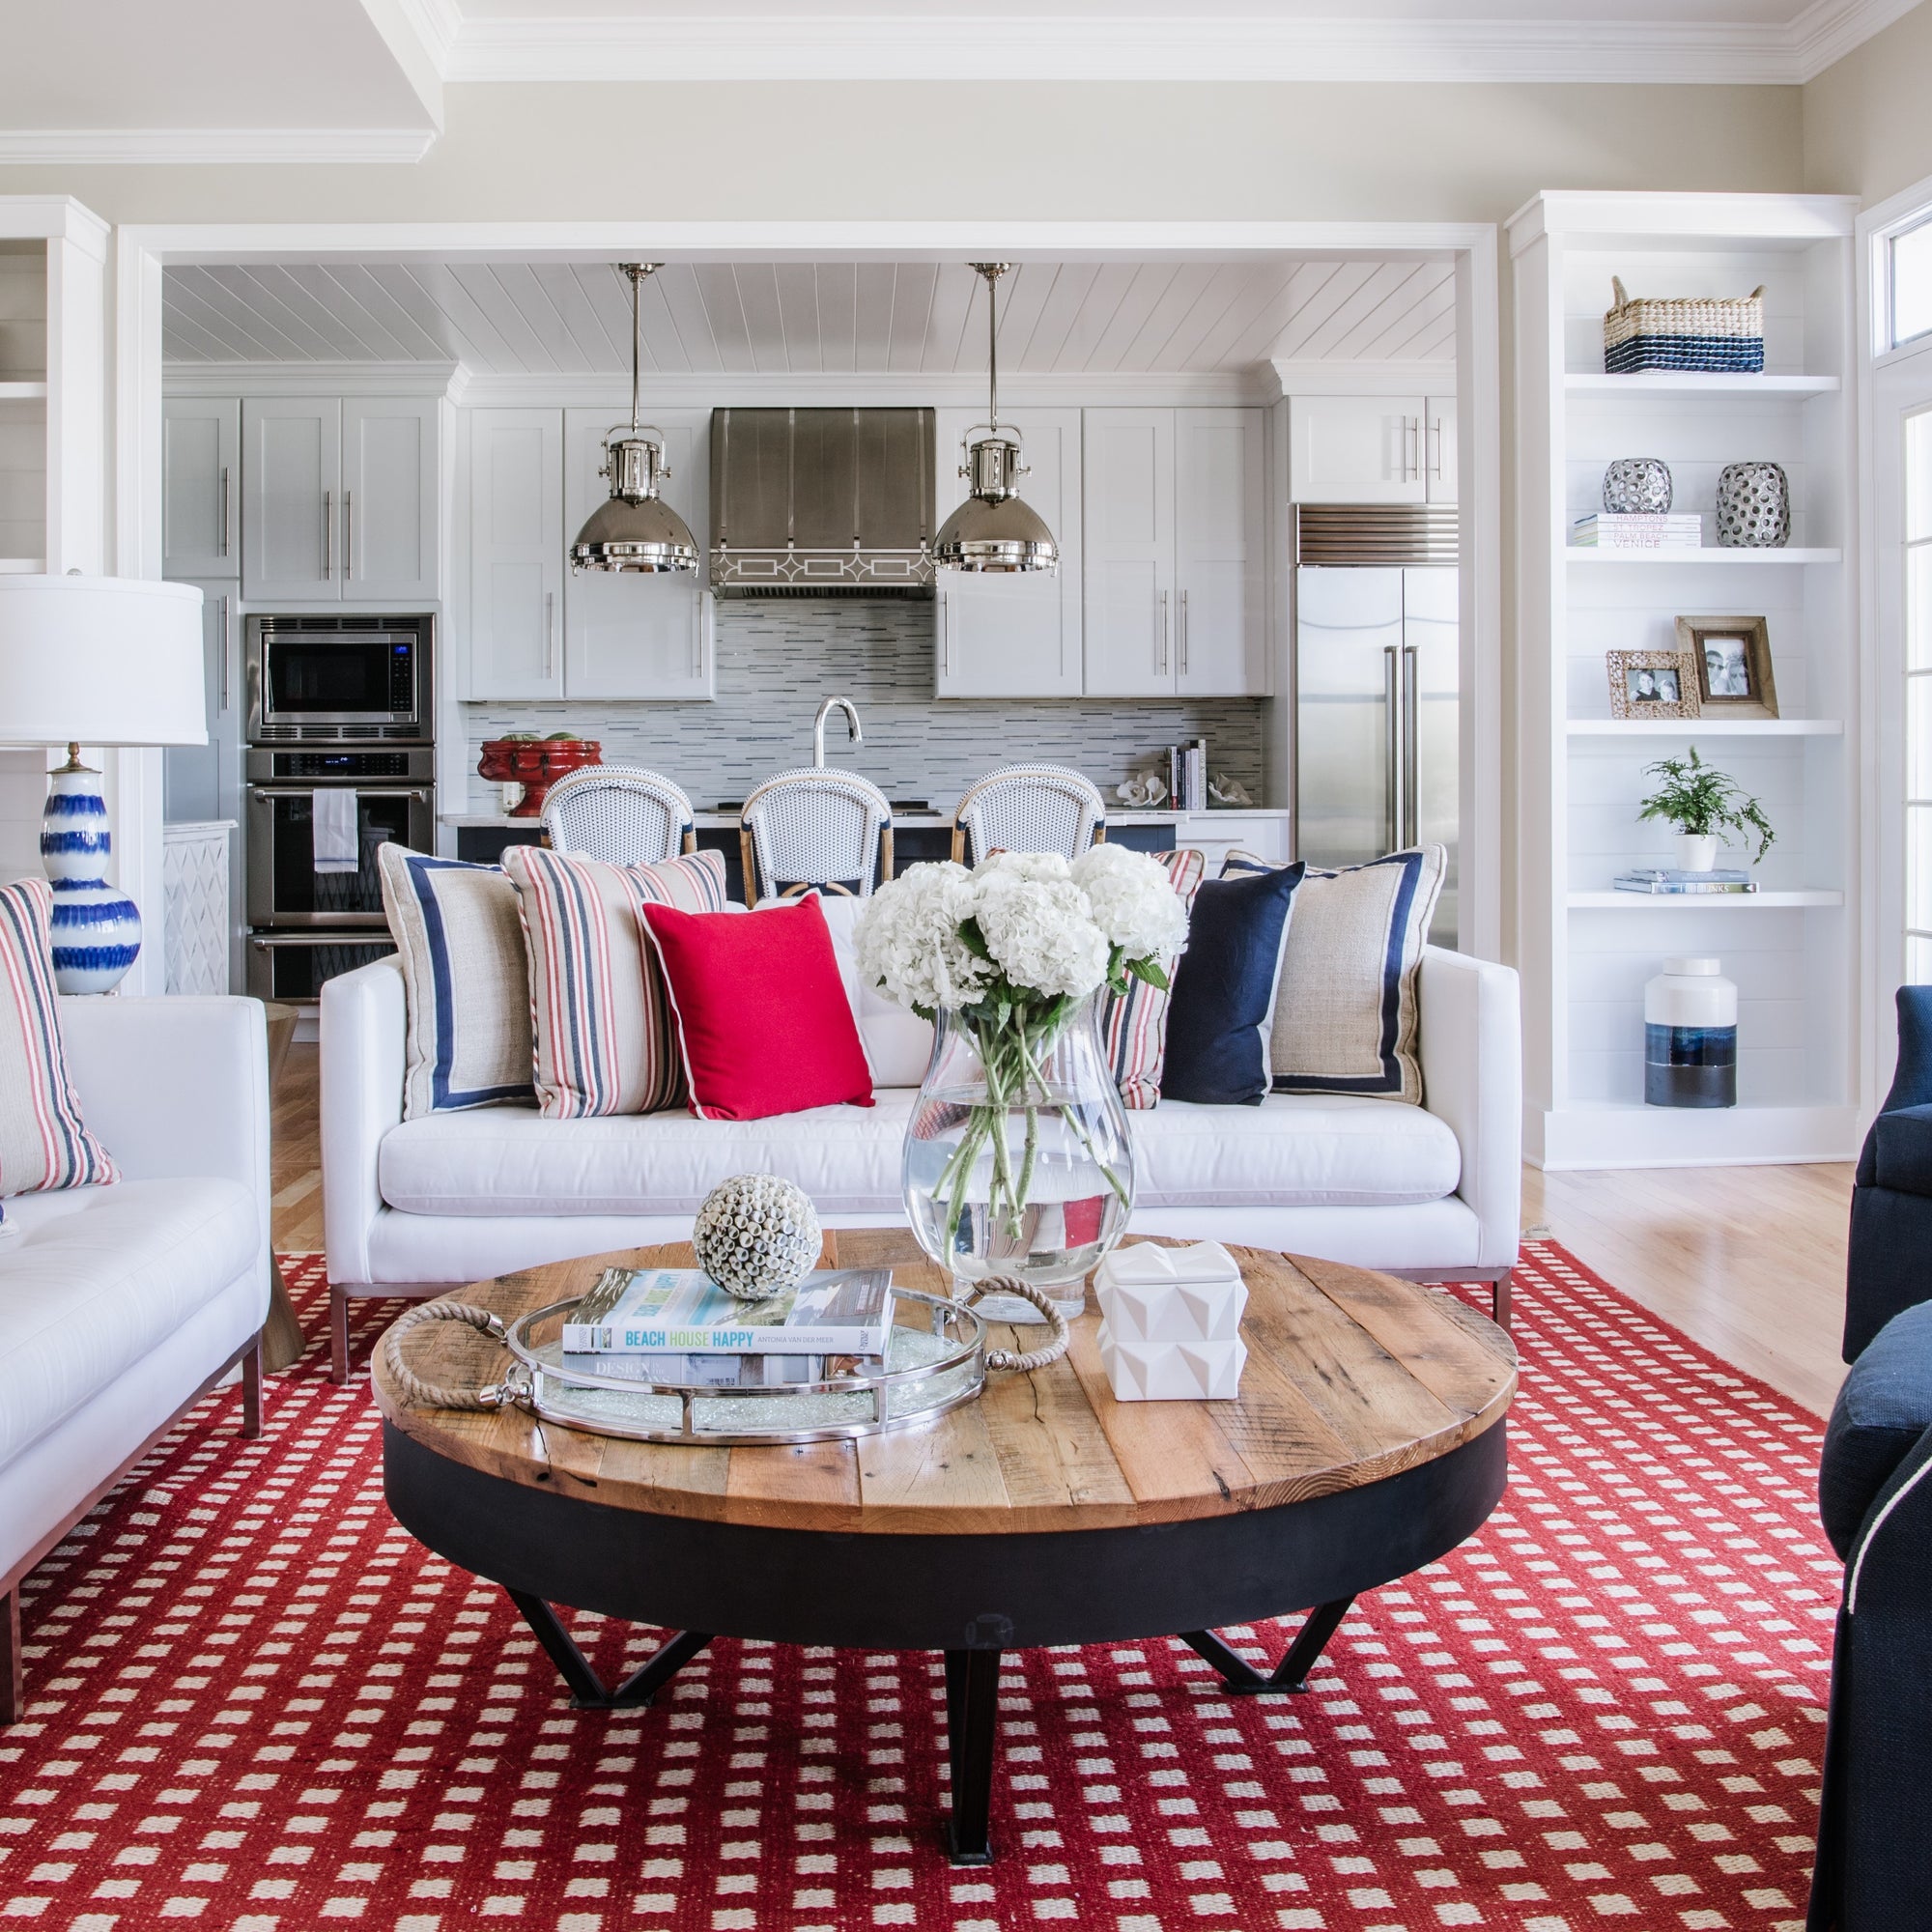 Eastern Shore modern luxury by Jamie Merida Interiors - shows red, white, and blue sitting room with nautical style; kitchen in background